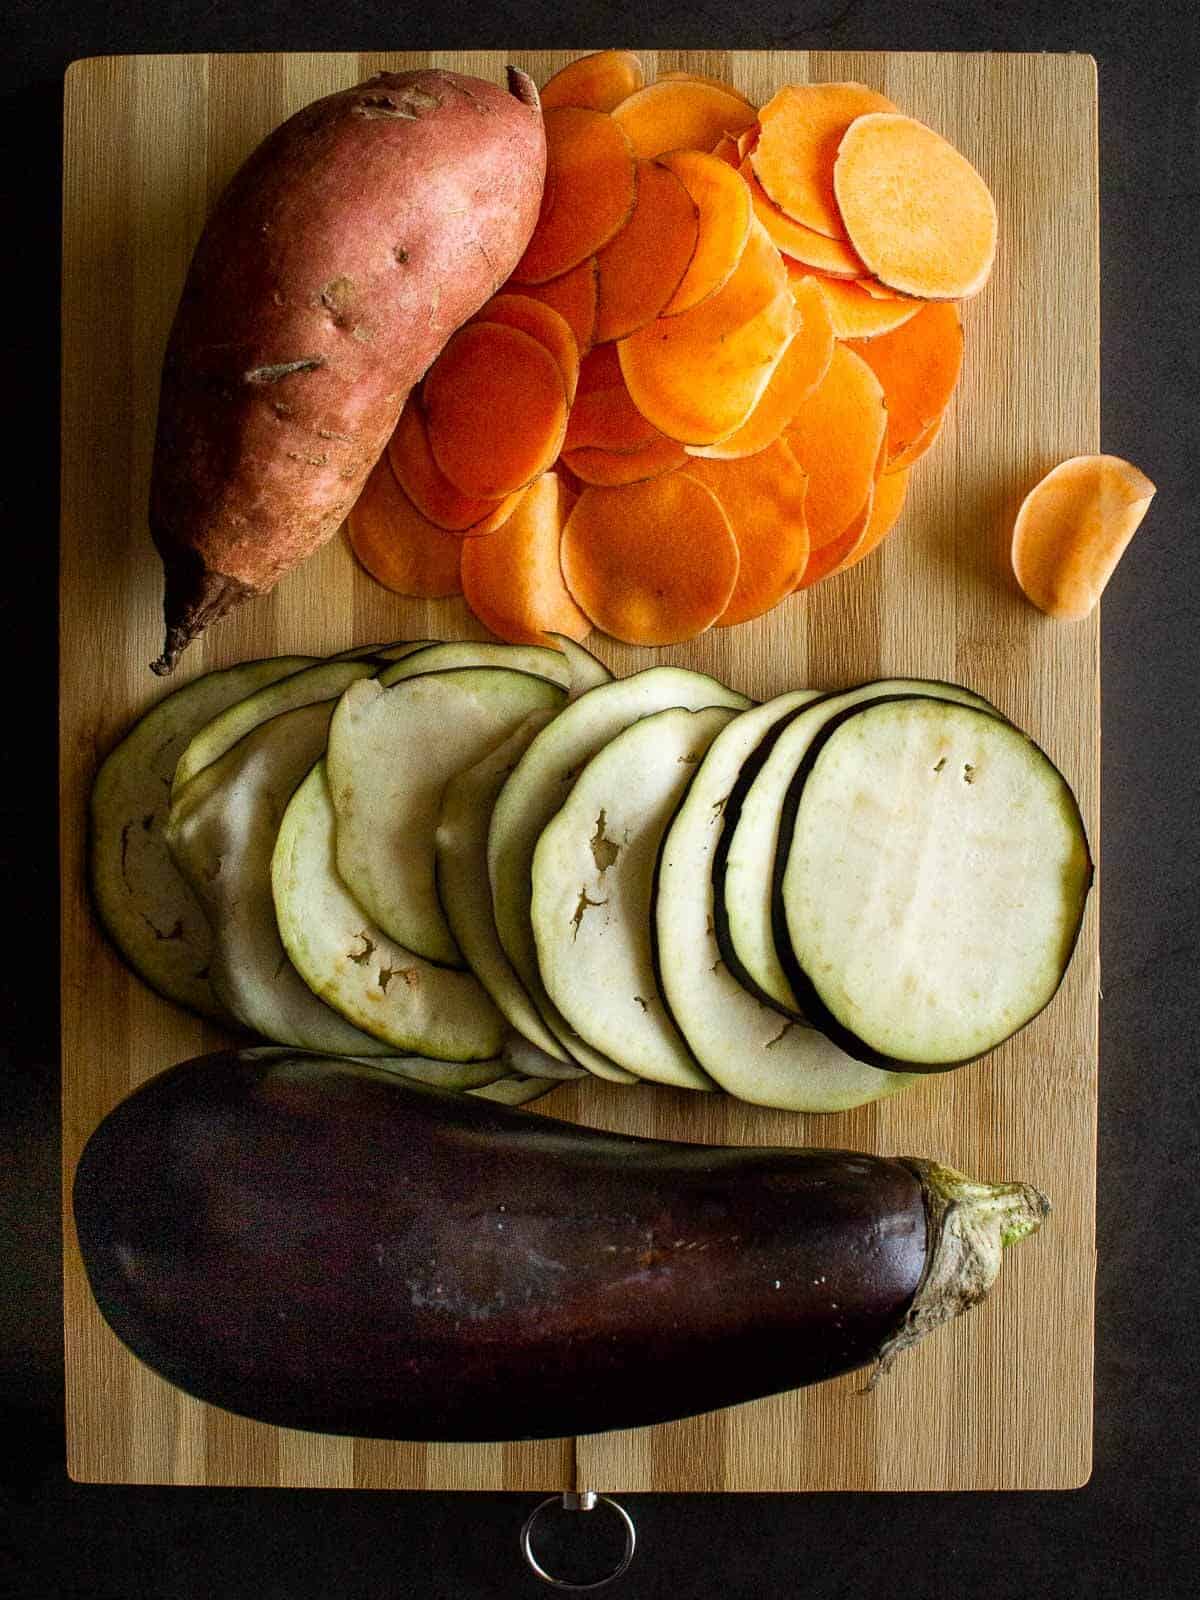 Ingredients for the layers: Thinly Sliced Sweet Potatoes and Eggplants